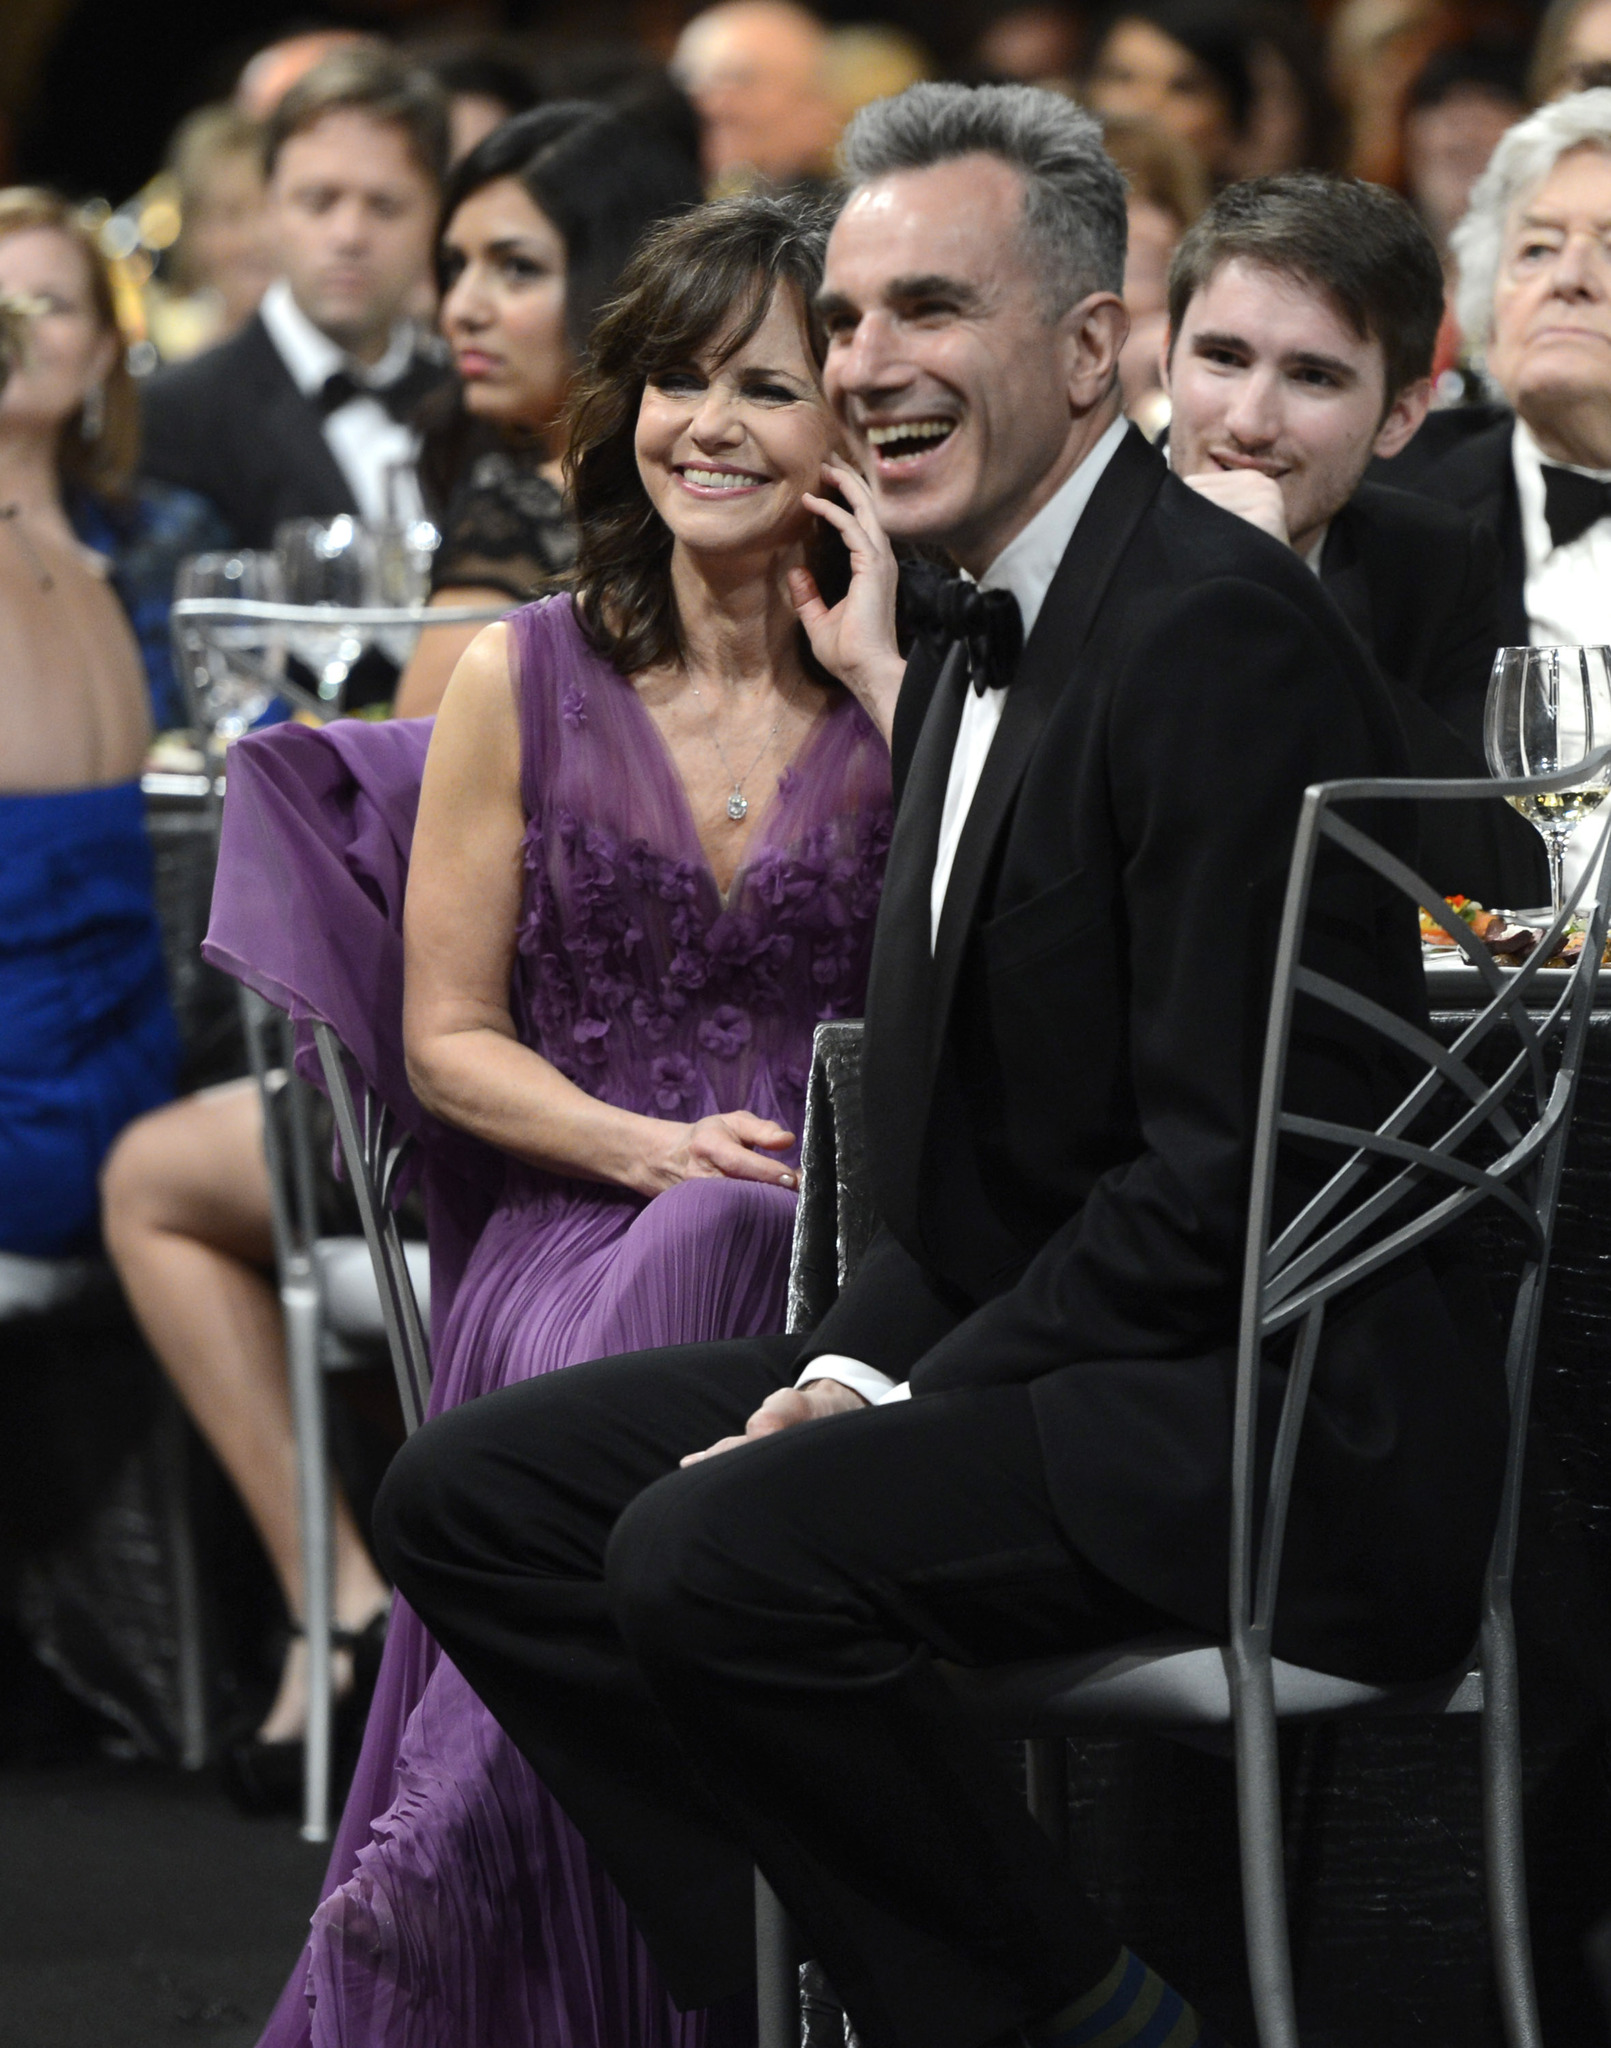 Daniel Day-Lewis and Sally Field